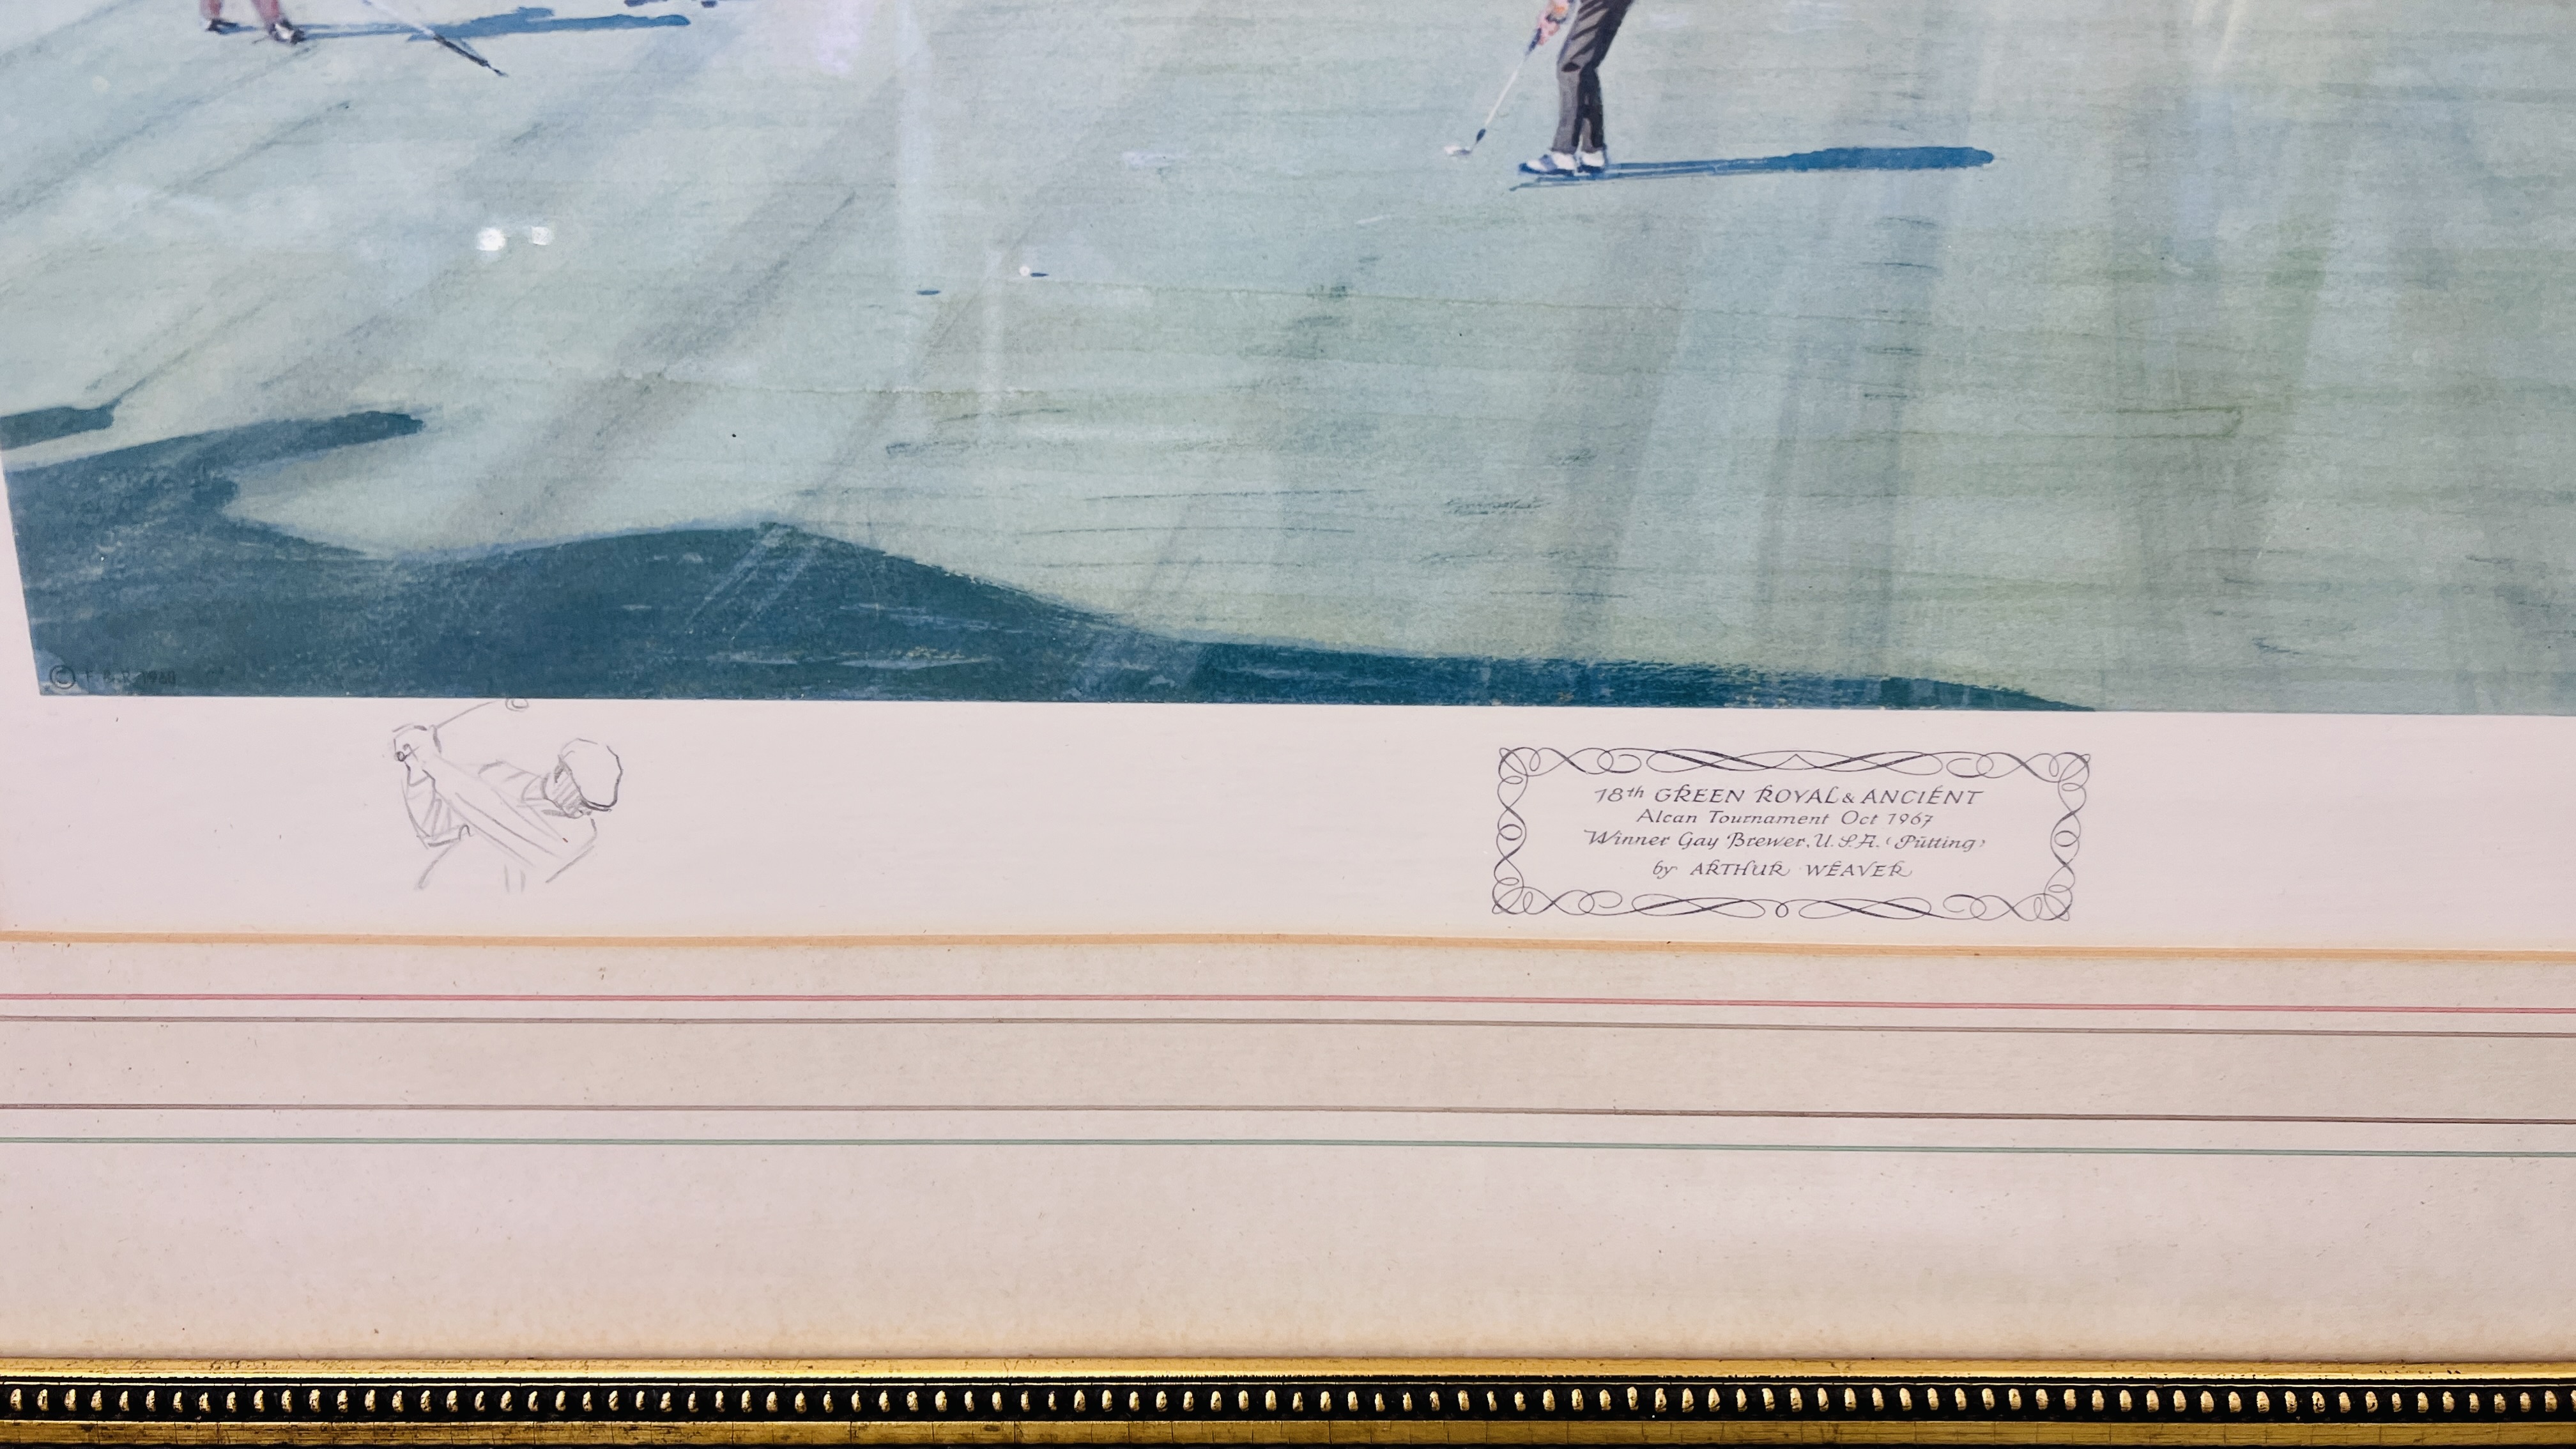 A GILT FRAMED AND MOUNTED ARTHUR WEAVER GOLFING PRINT "18th GREEN ROYAL & ANCIENT" 50CM X 62CM. - Image 4 of 5